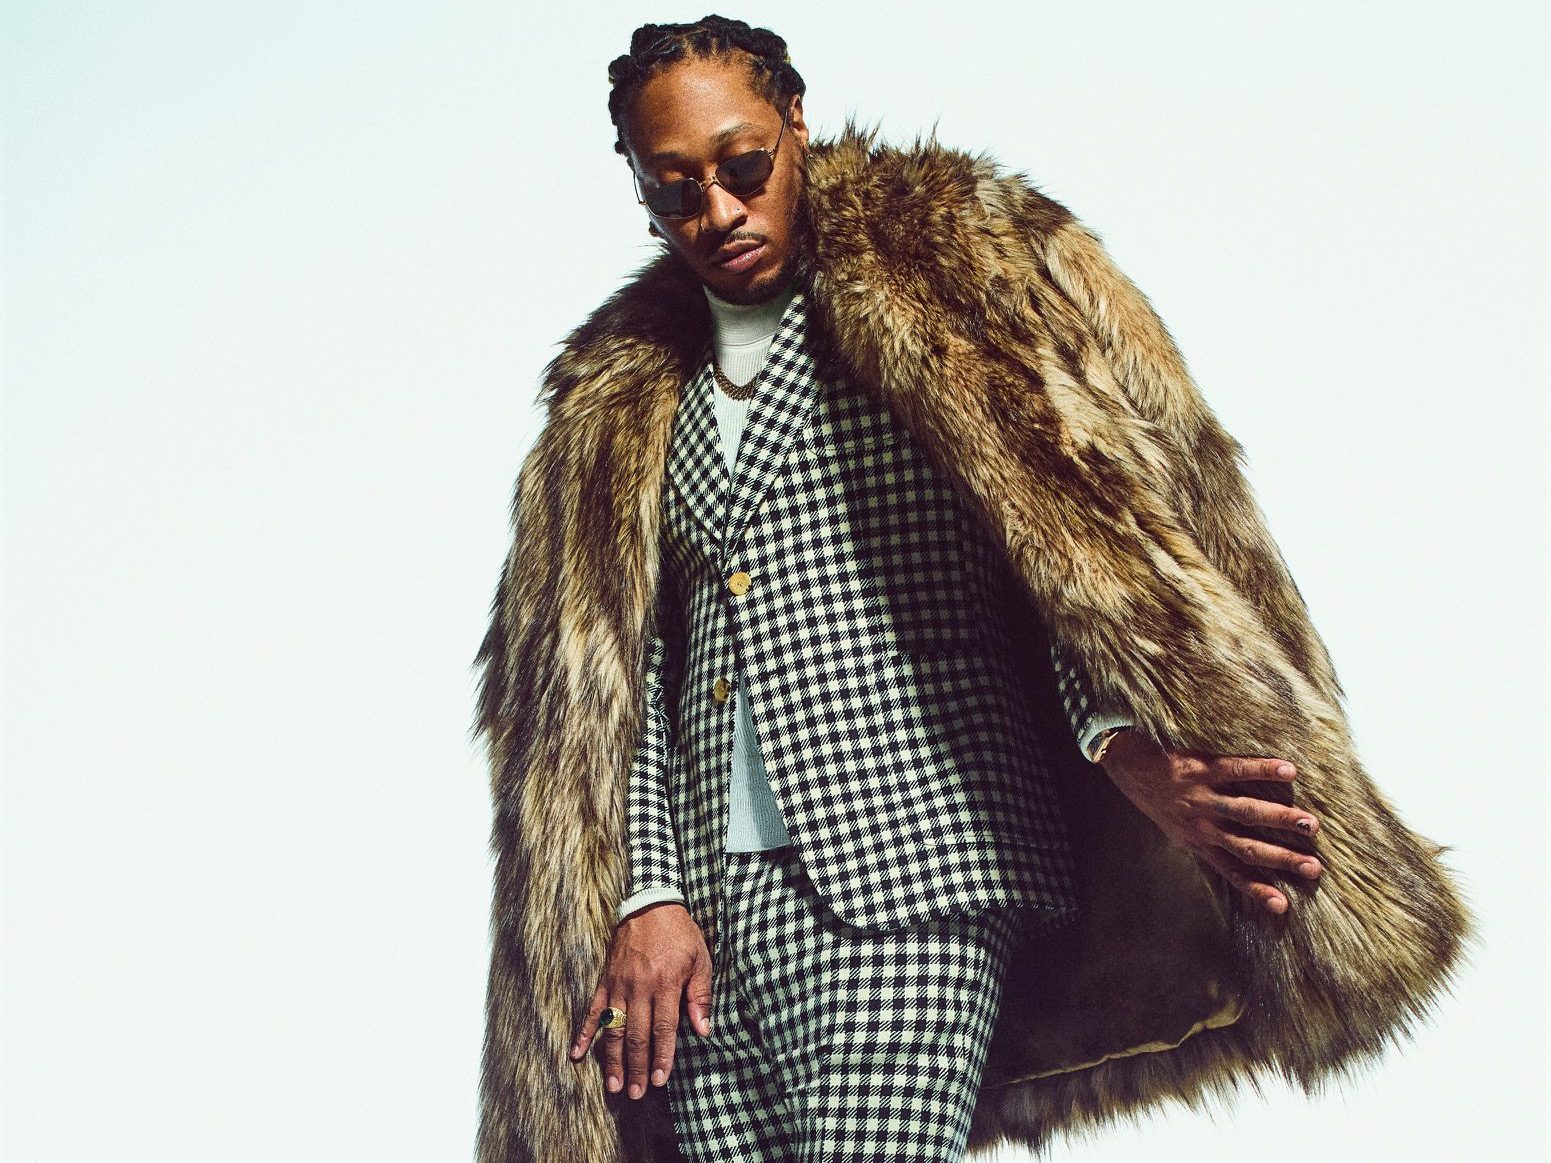 FUTURE TAKES HOME “BEST MELODIC RAP PERFORMANCE” AWARD AT THE 2023 GRAMMY® AWARDS